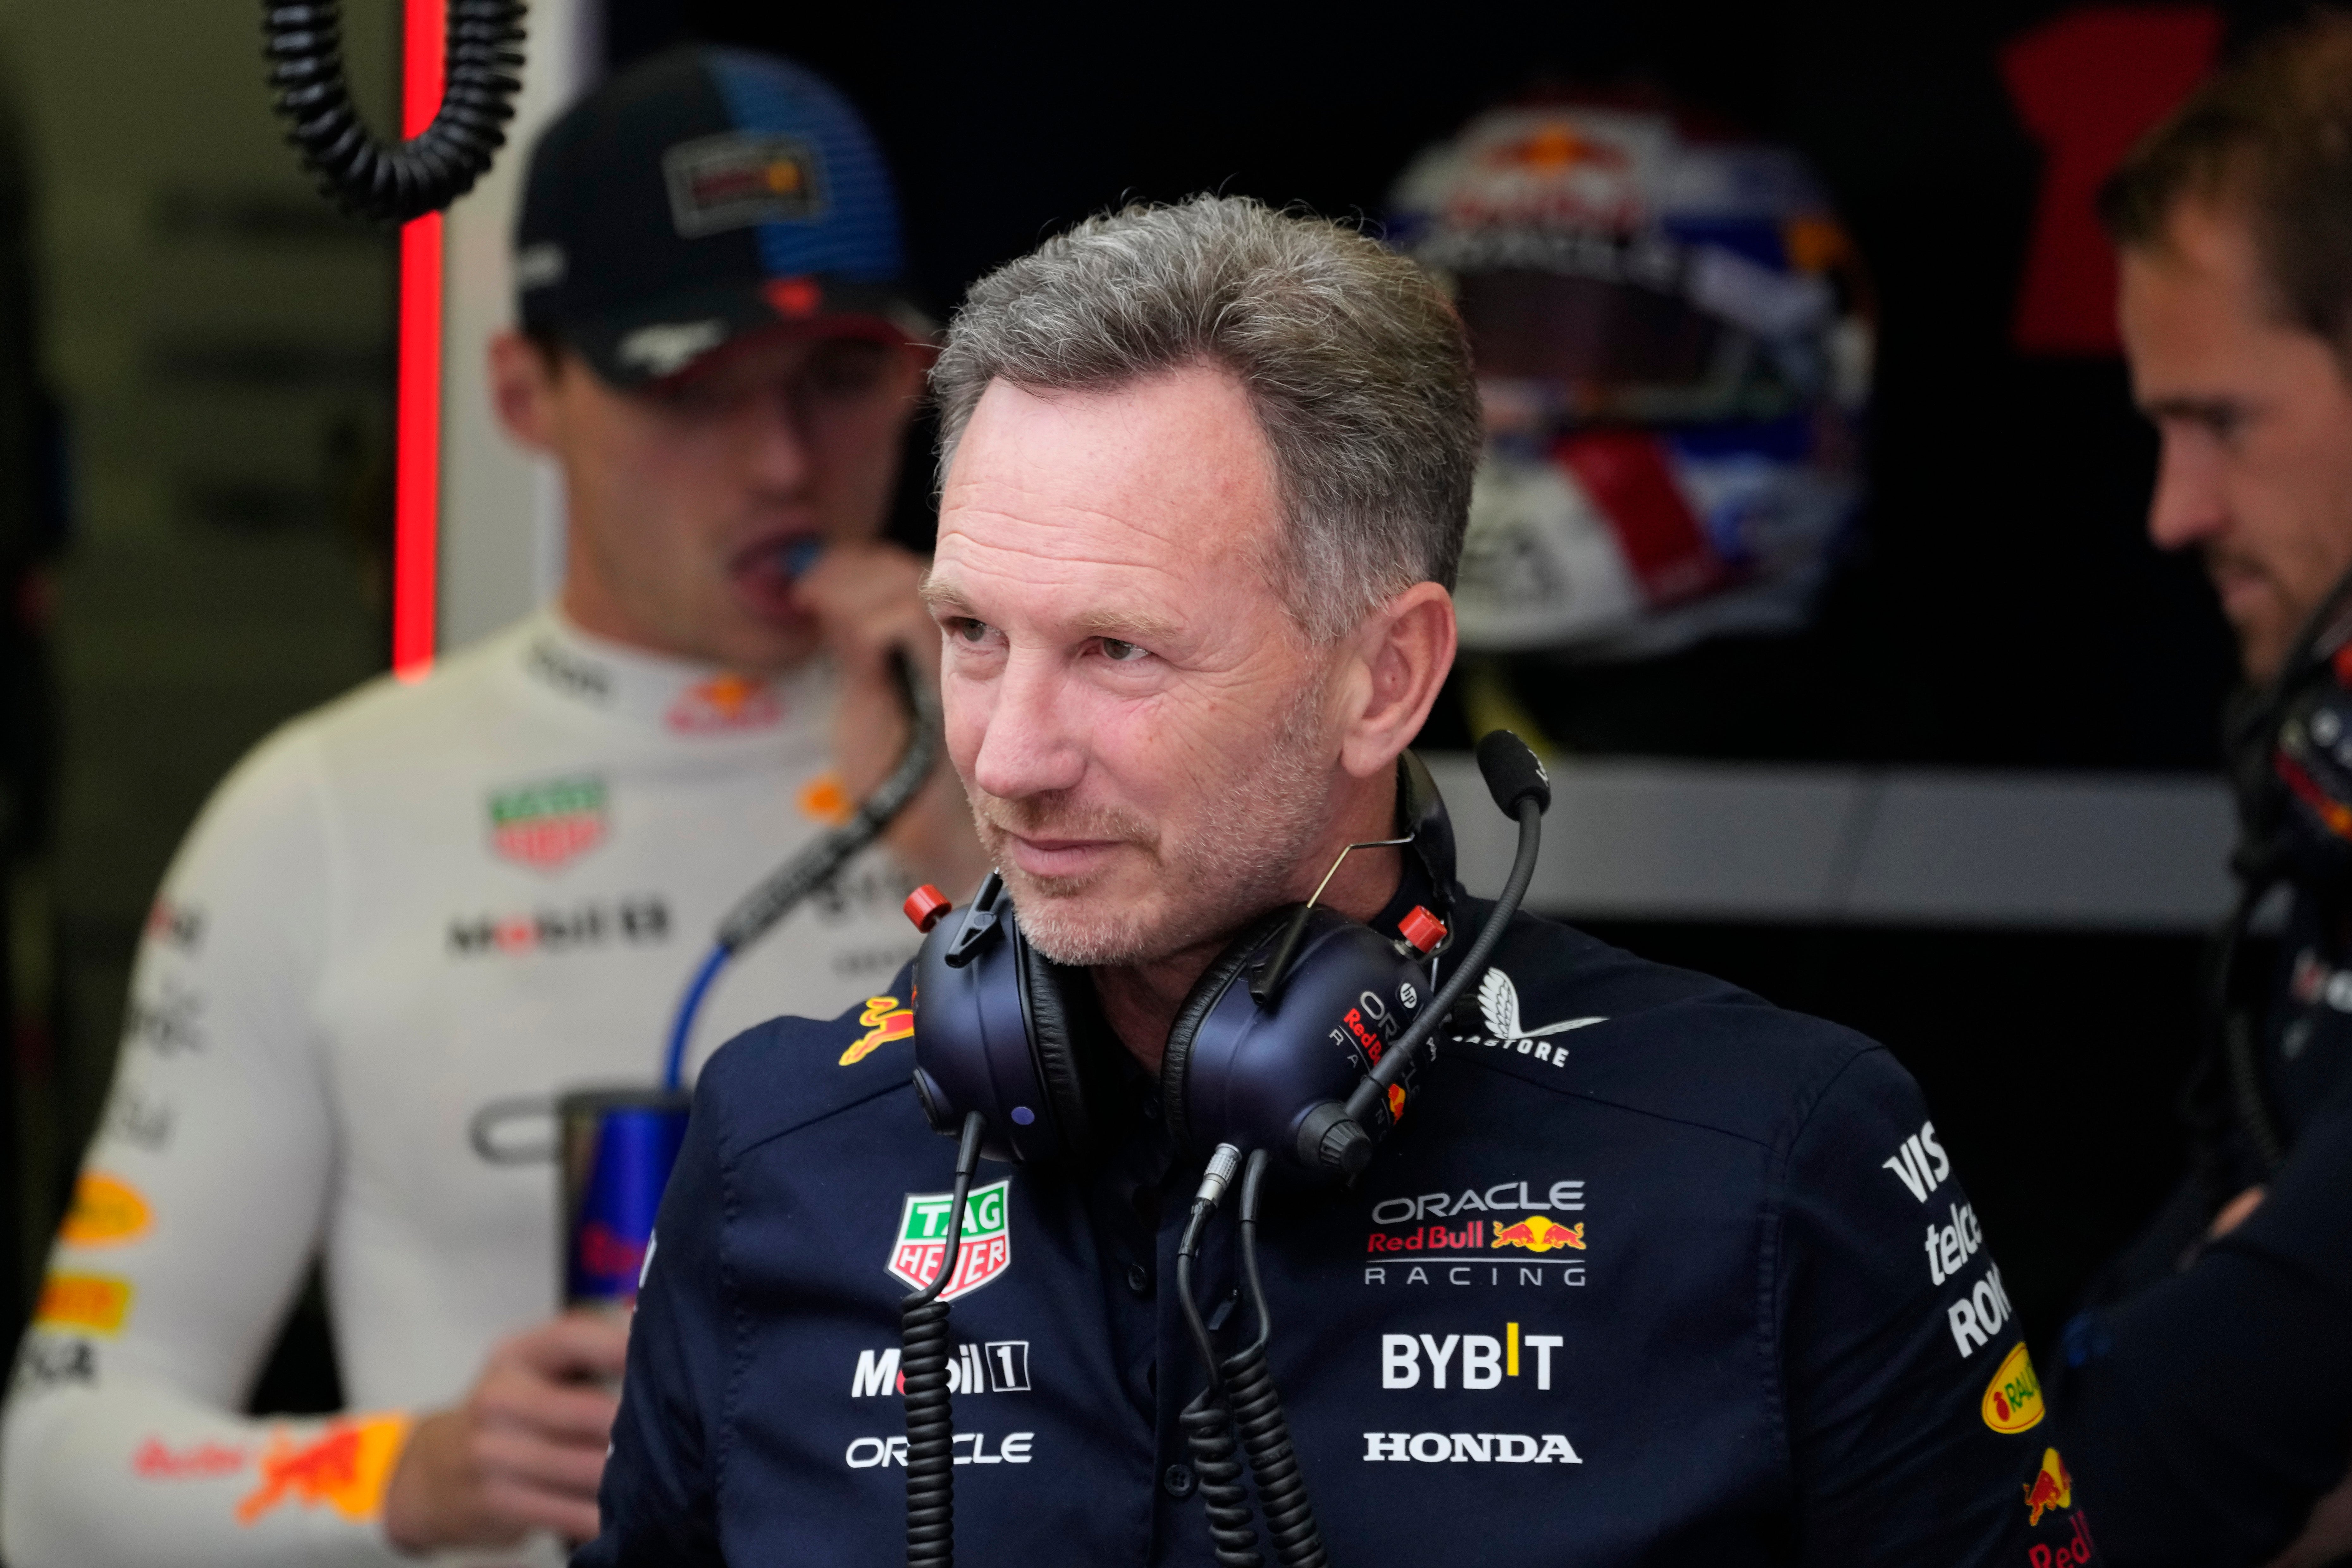 Horner responded with a firm statement: ‘I won’t comment on anonymous speculation, but to reiterate, I have always denied the allegations’